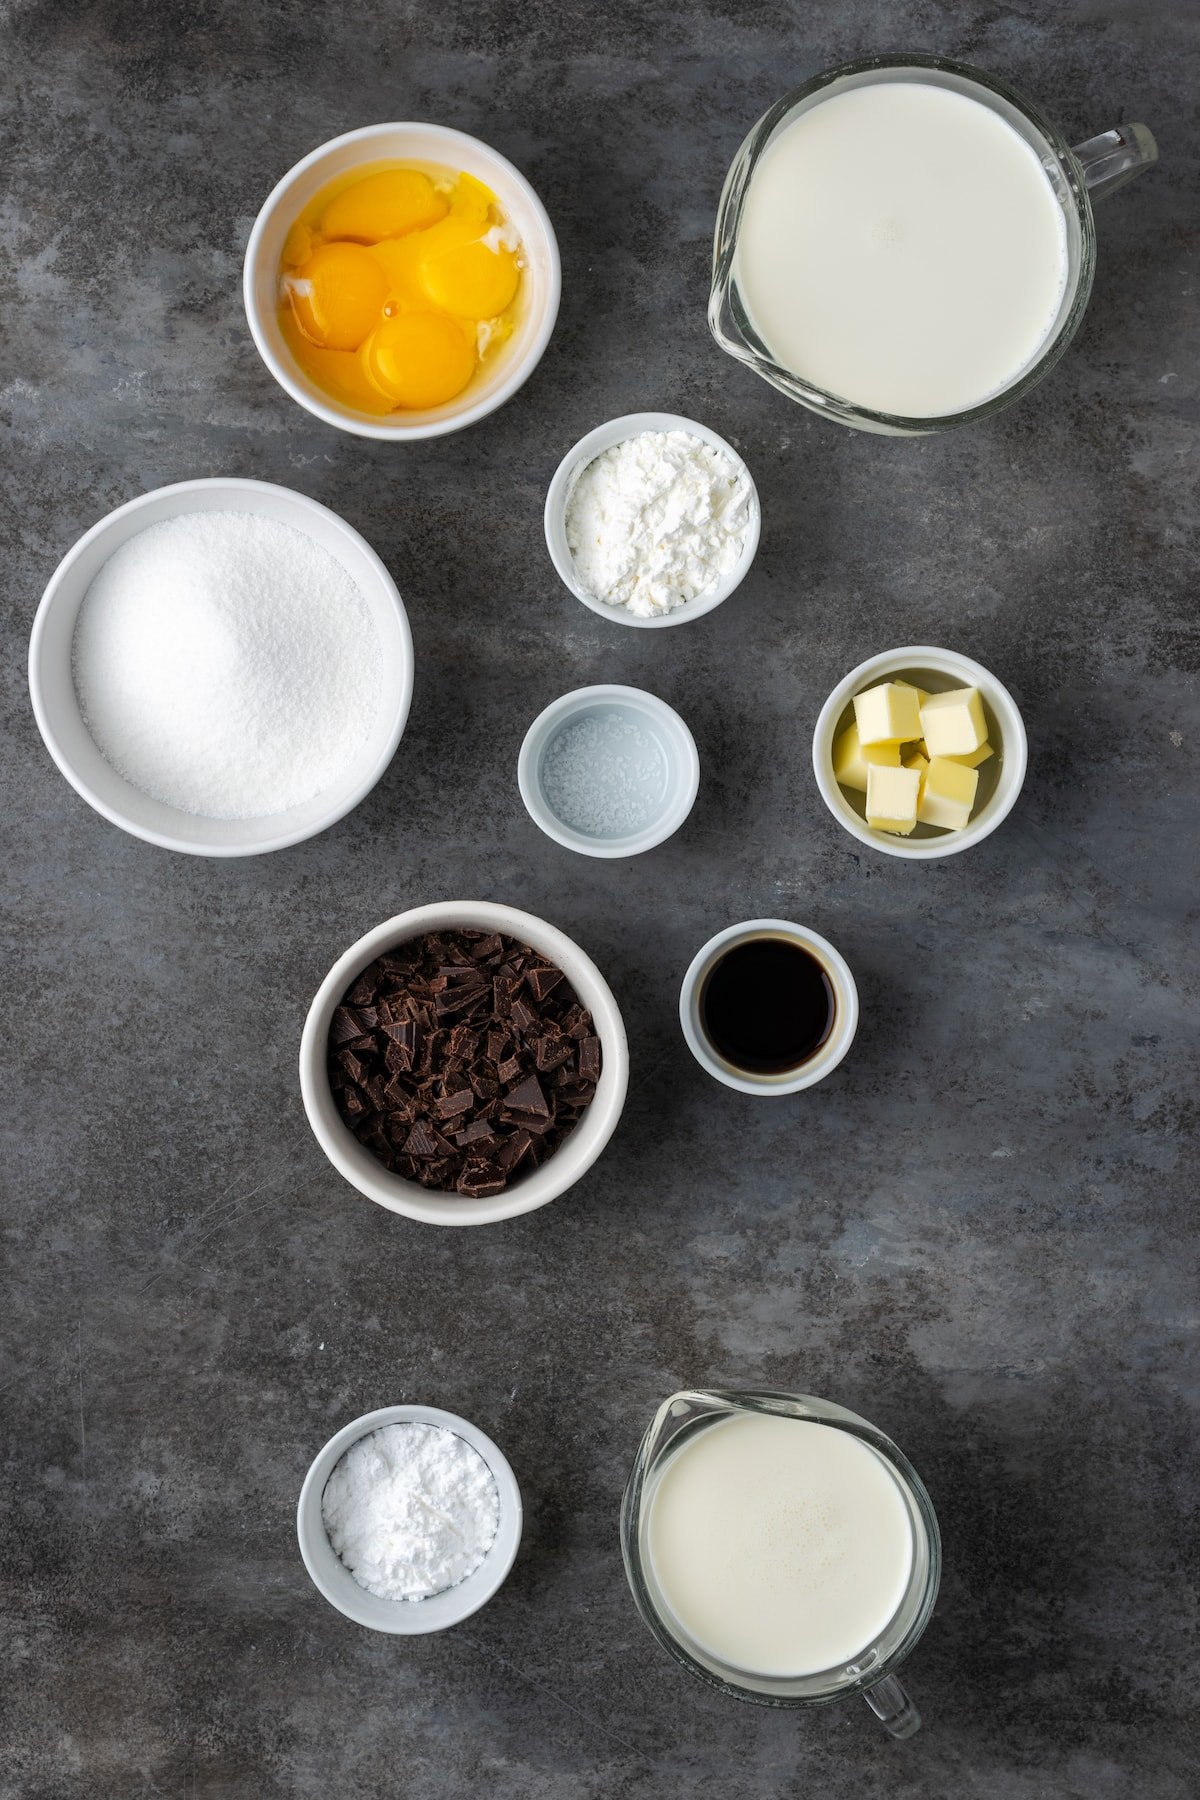 Ingredients for chocolate pudding pie.